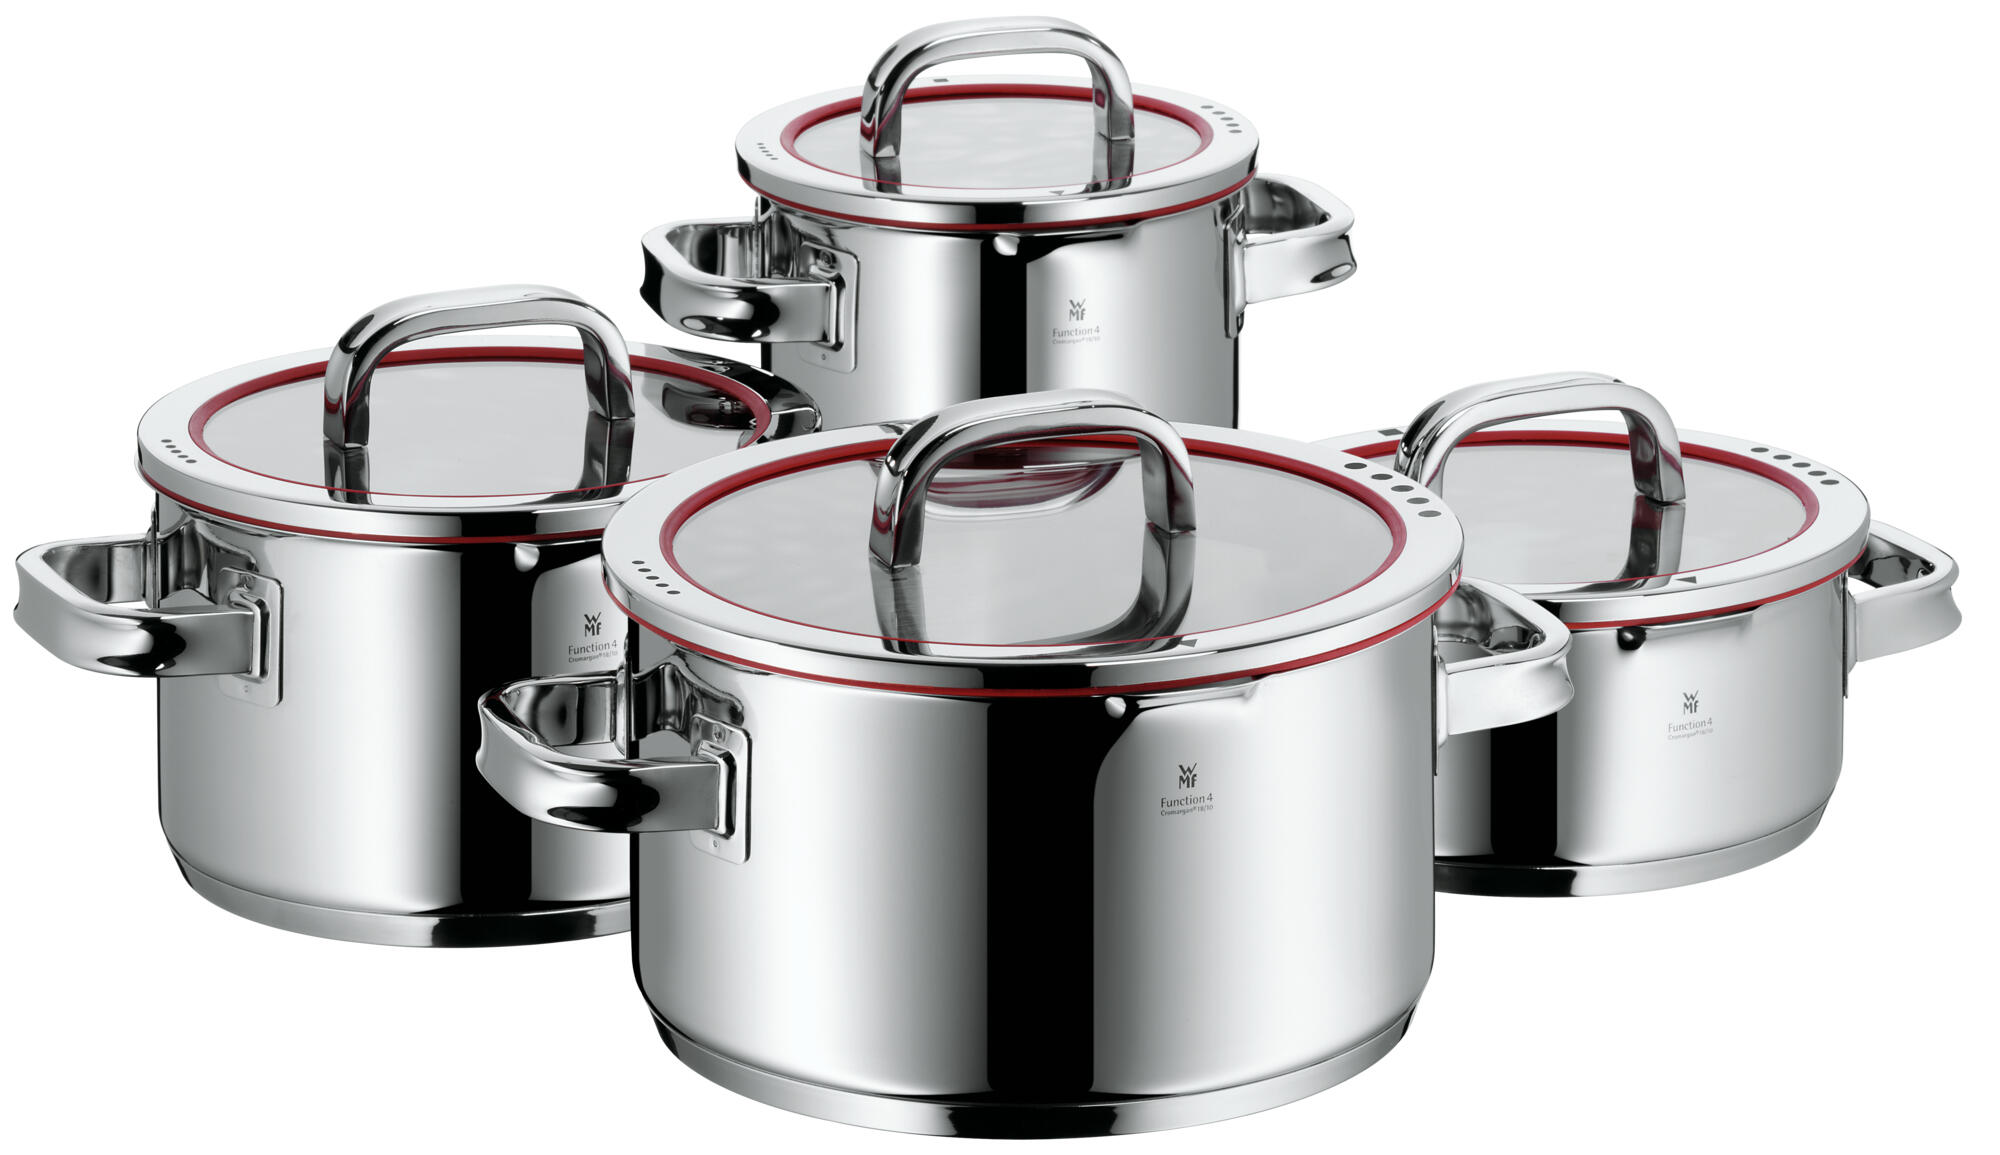 BAERFO baerfo 4 piece pots and pans set, cookware set - healthy pot sets  with stainless steel lids and handles - dishwasher safe